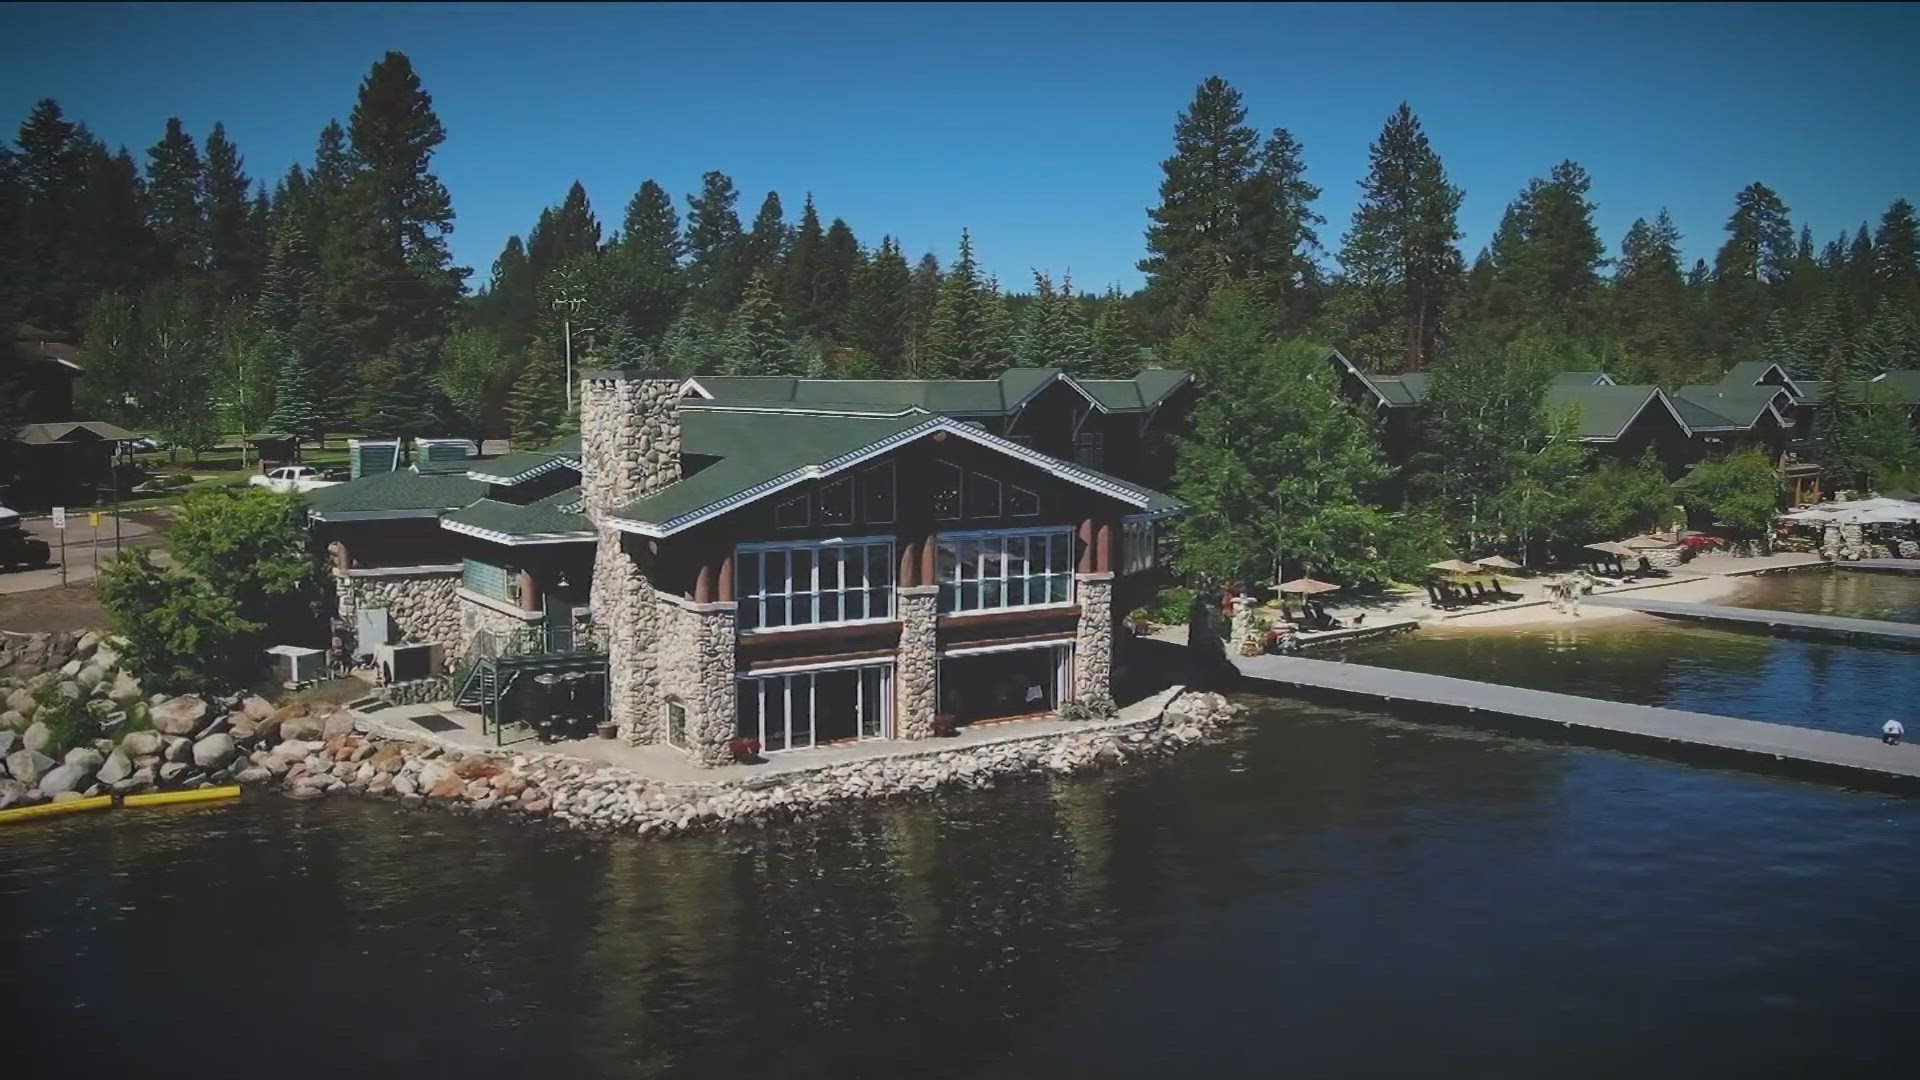 KTVB learned of five allegations of sexual assault or harassment at Shore Lodge in the past two-and-a-half-years. The resort is accused of mishandling those claims.